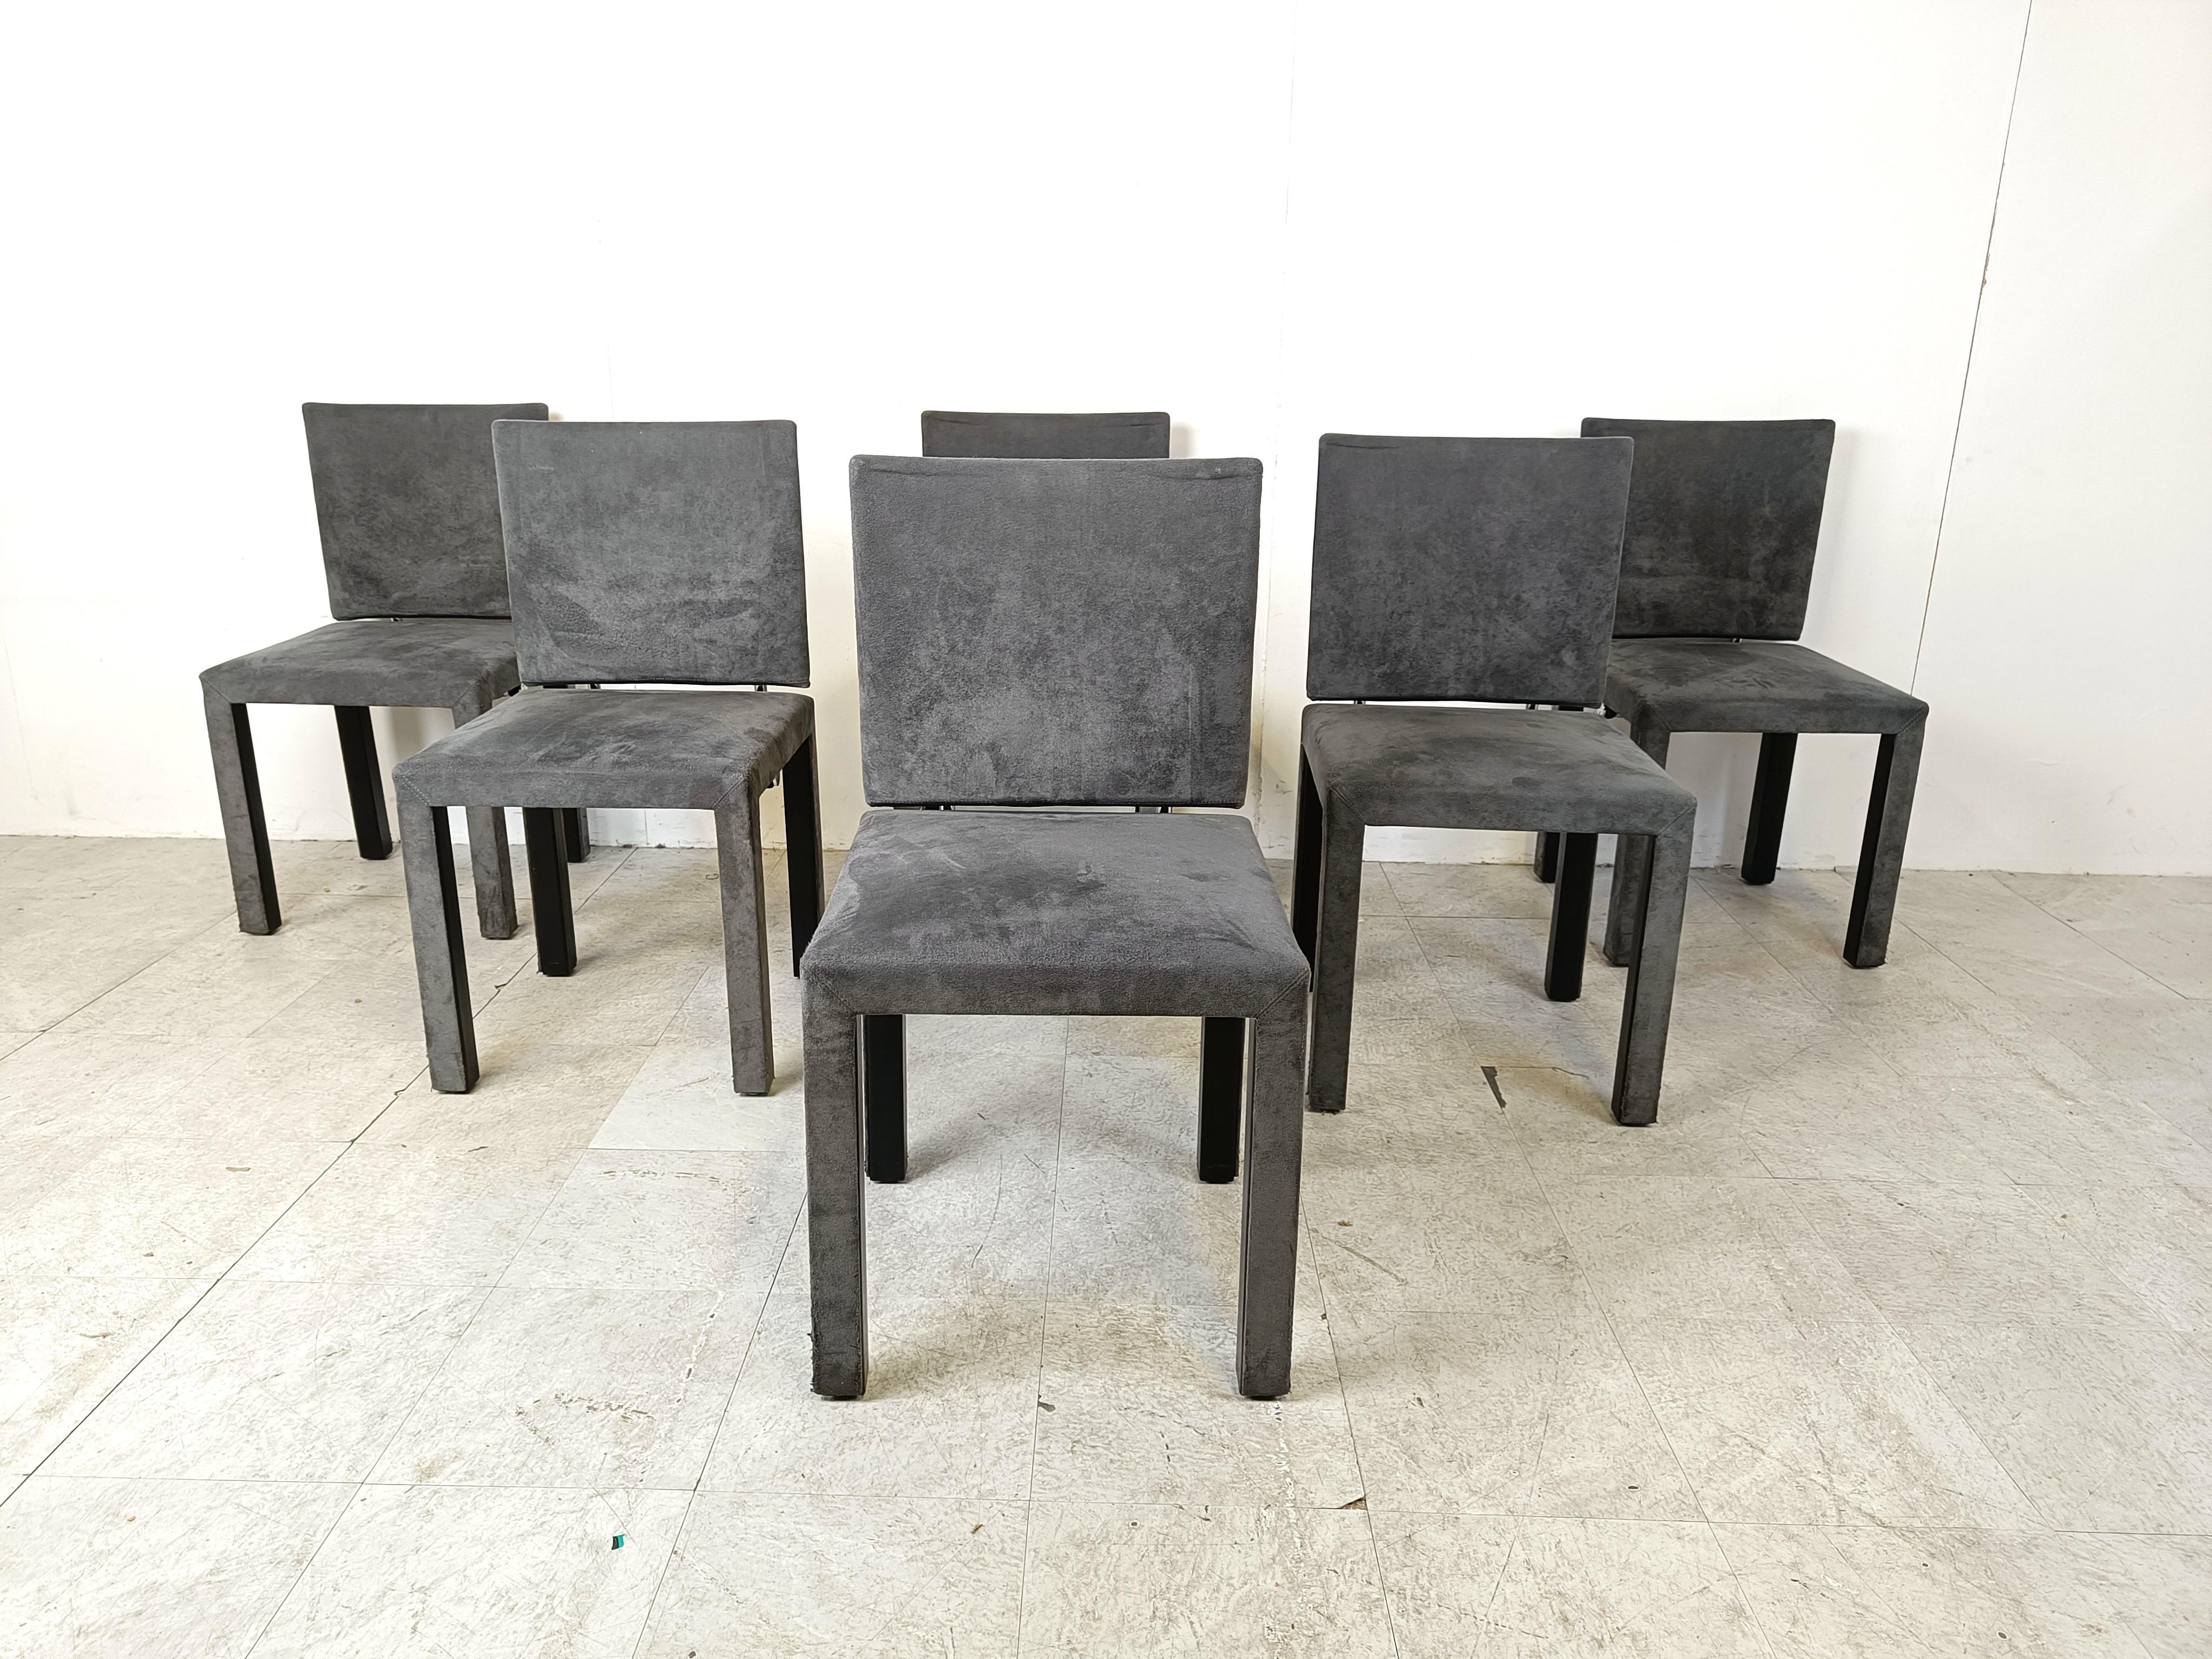 Post-Modern Arcadia dining chairs by Paolo Piva for B& B Italia set of 6